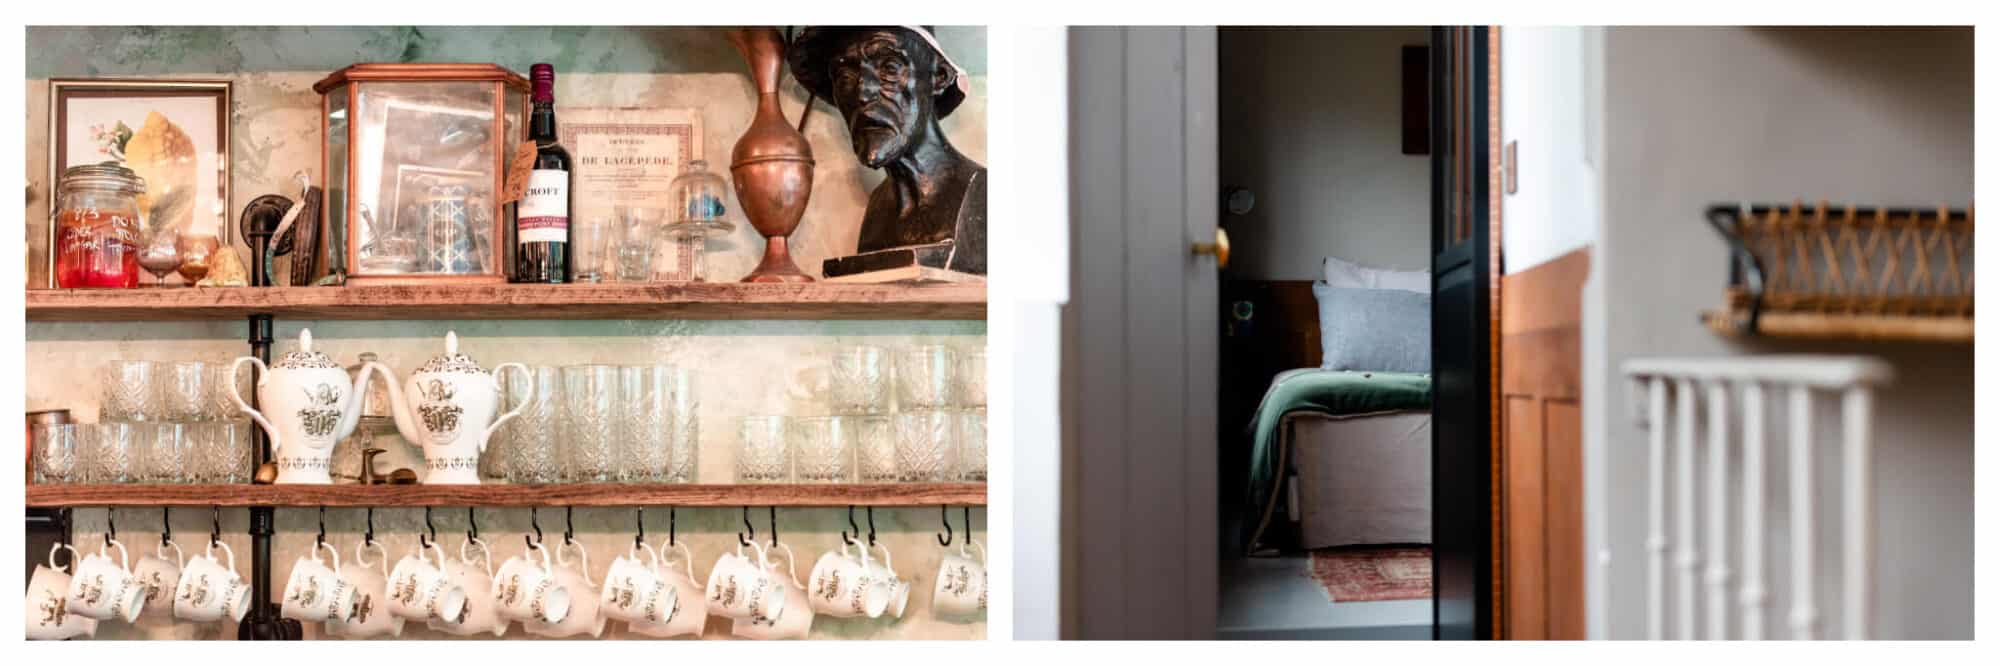 Left: An assortment of teacups and glass cups, along with various randomized items, sit on wooden shelves at Treize au Jardin, Right: An open door at the end of a hallway at Le 66 peaks into a bedroom